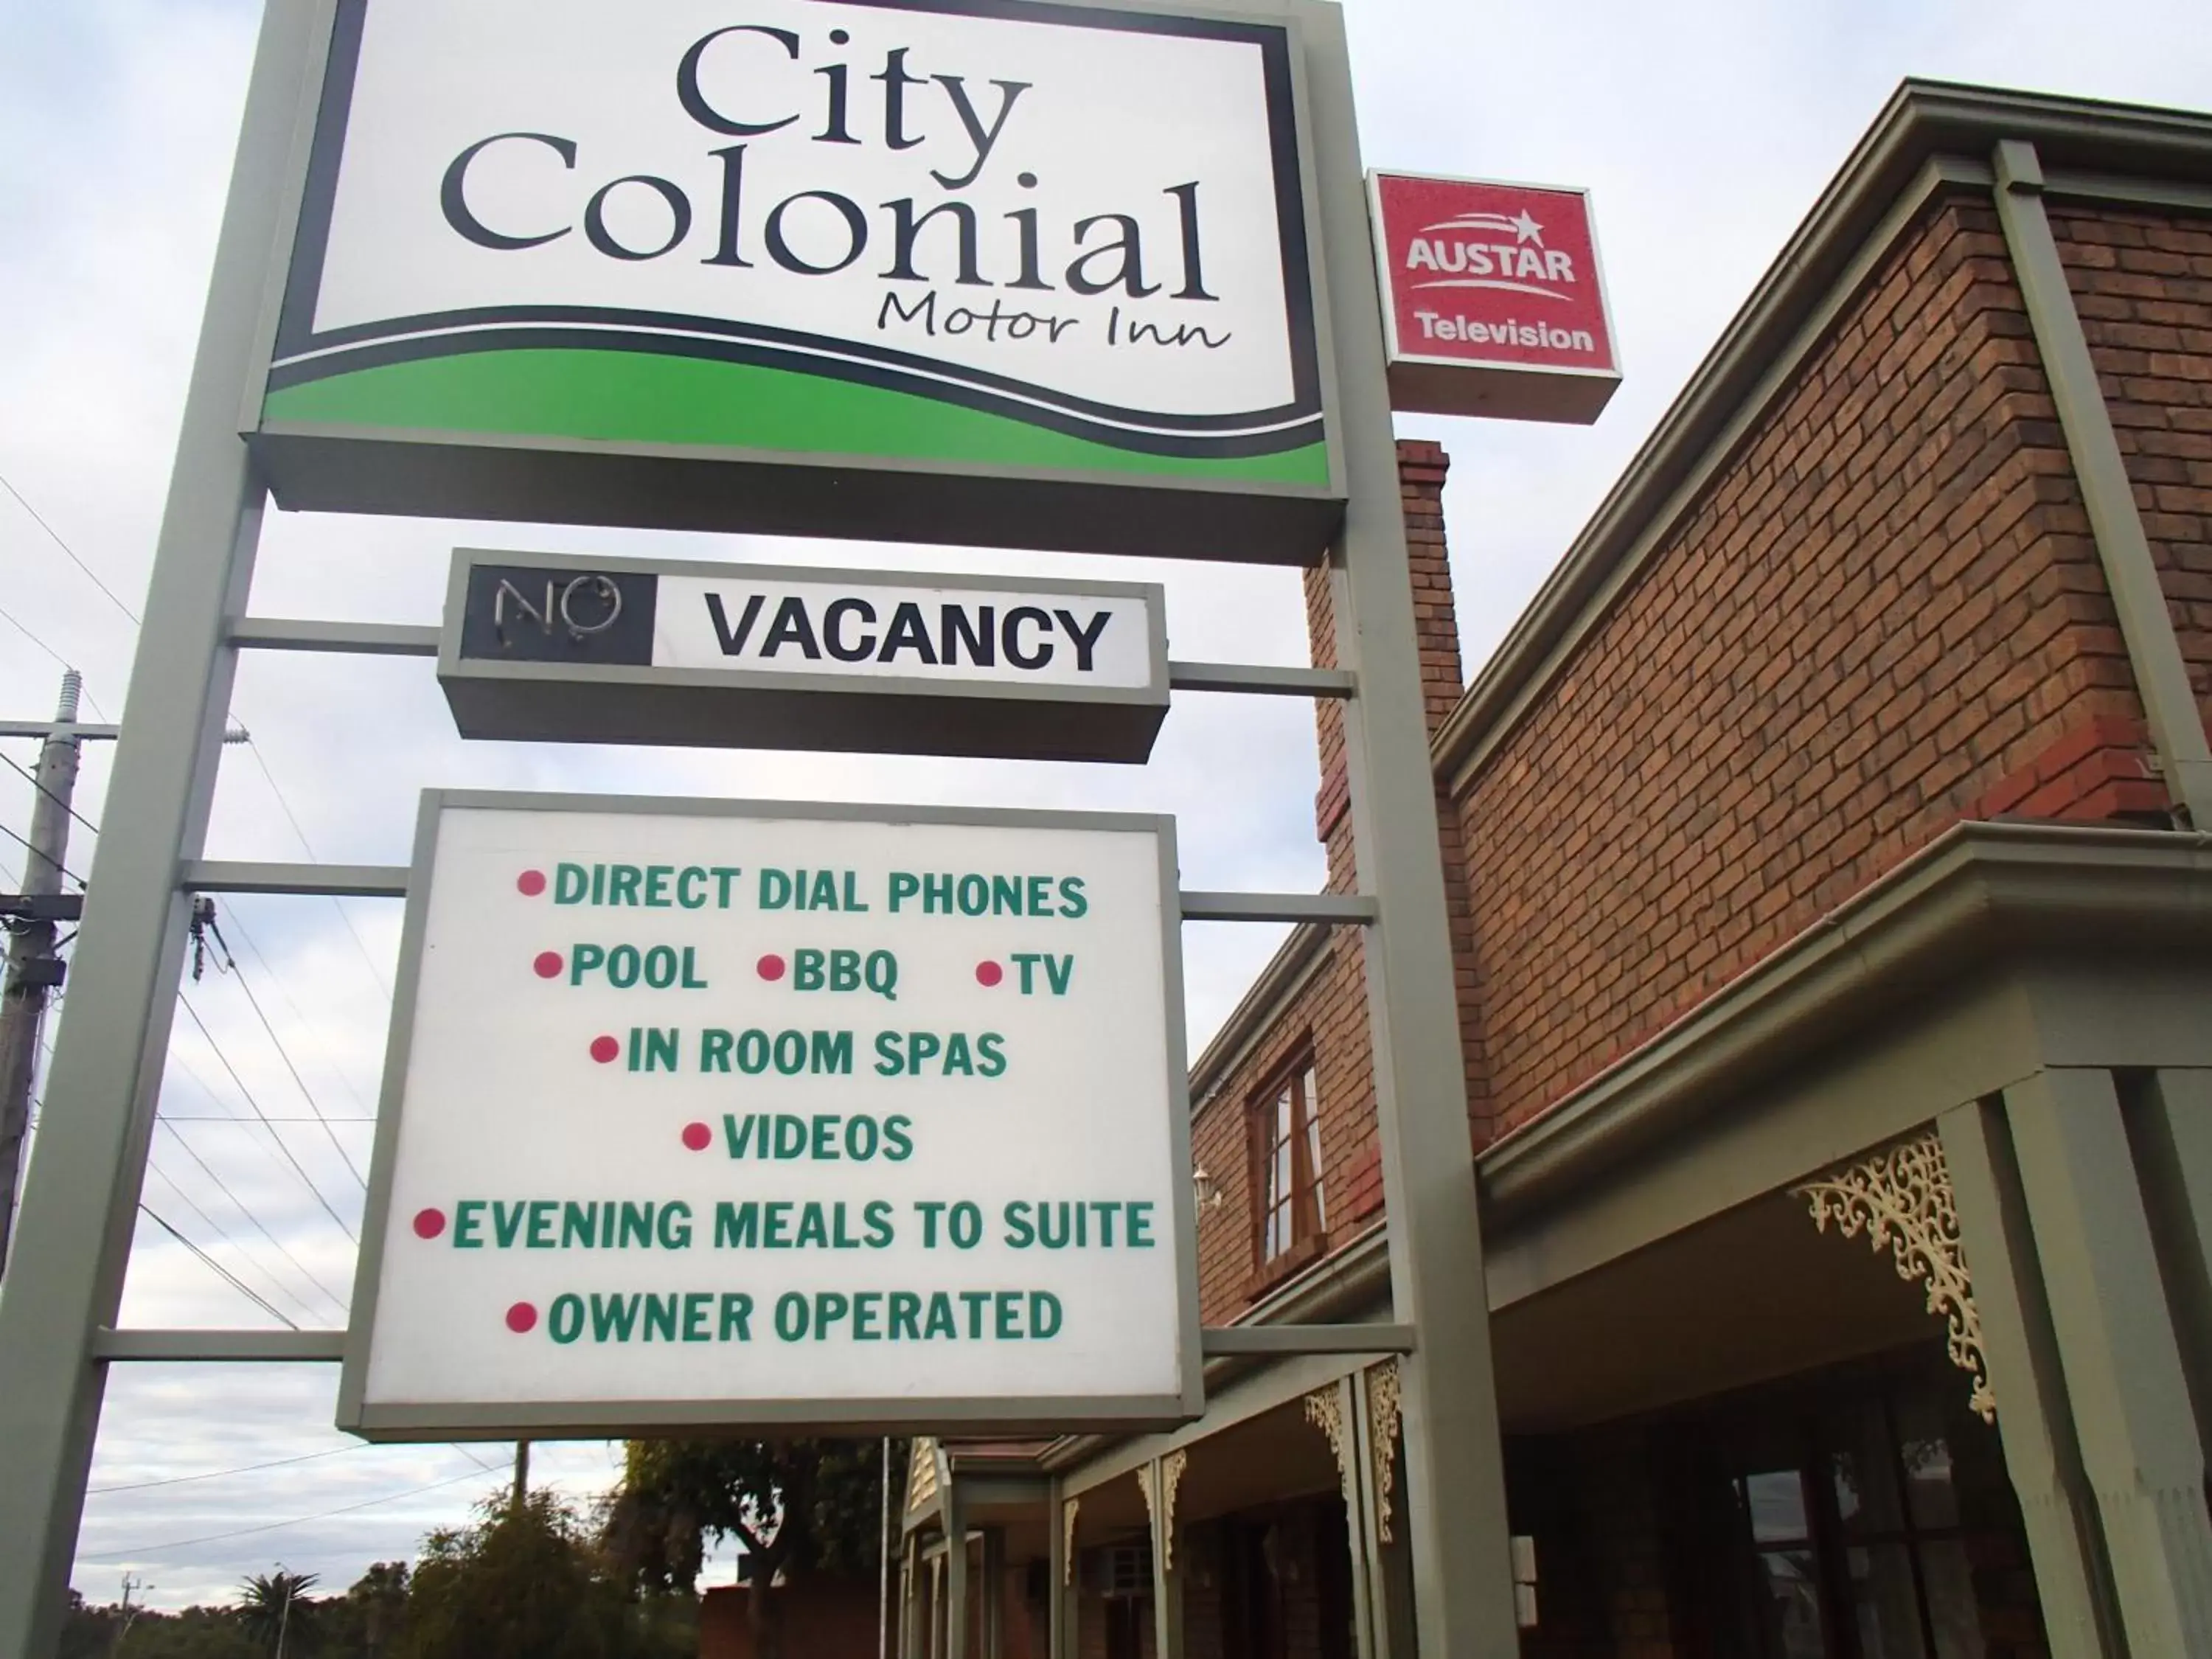 Property logo or sign in City Colonial Motor Inn